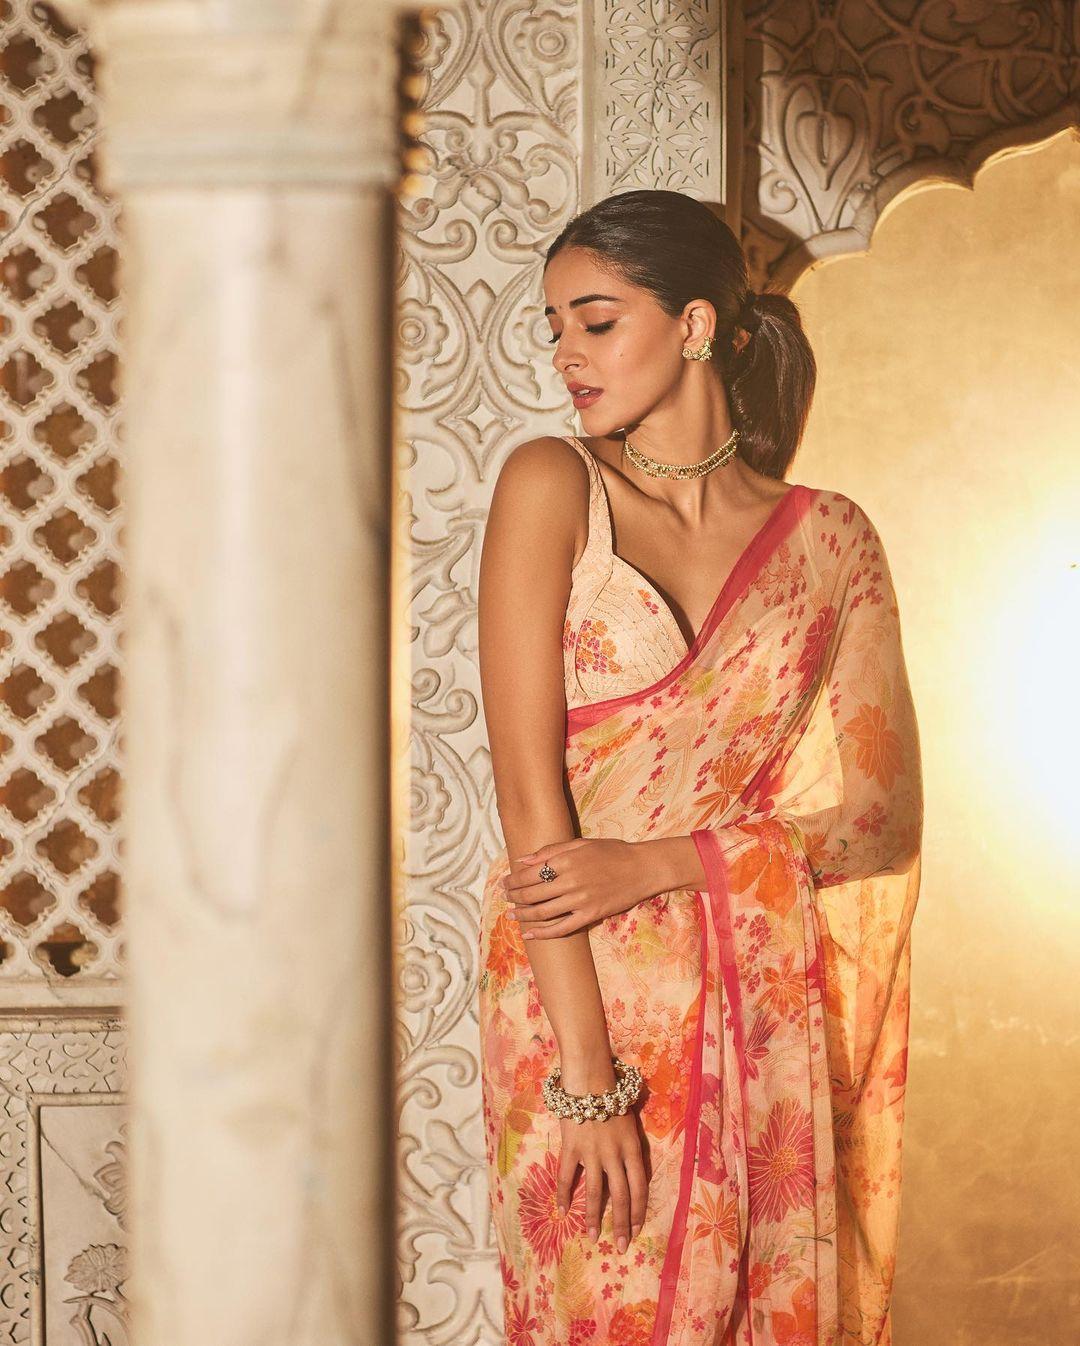 If you're a fan of her look, consider adding it to your wardrobe for Lohri